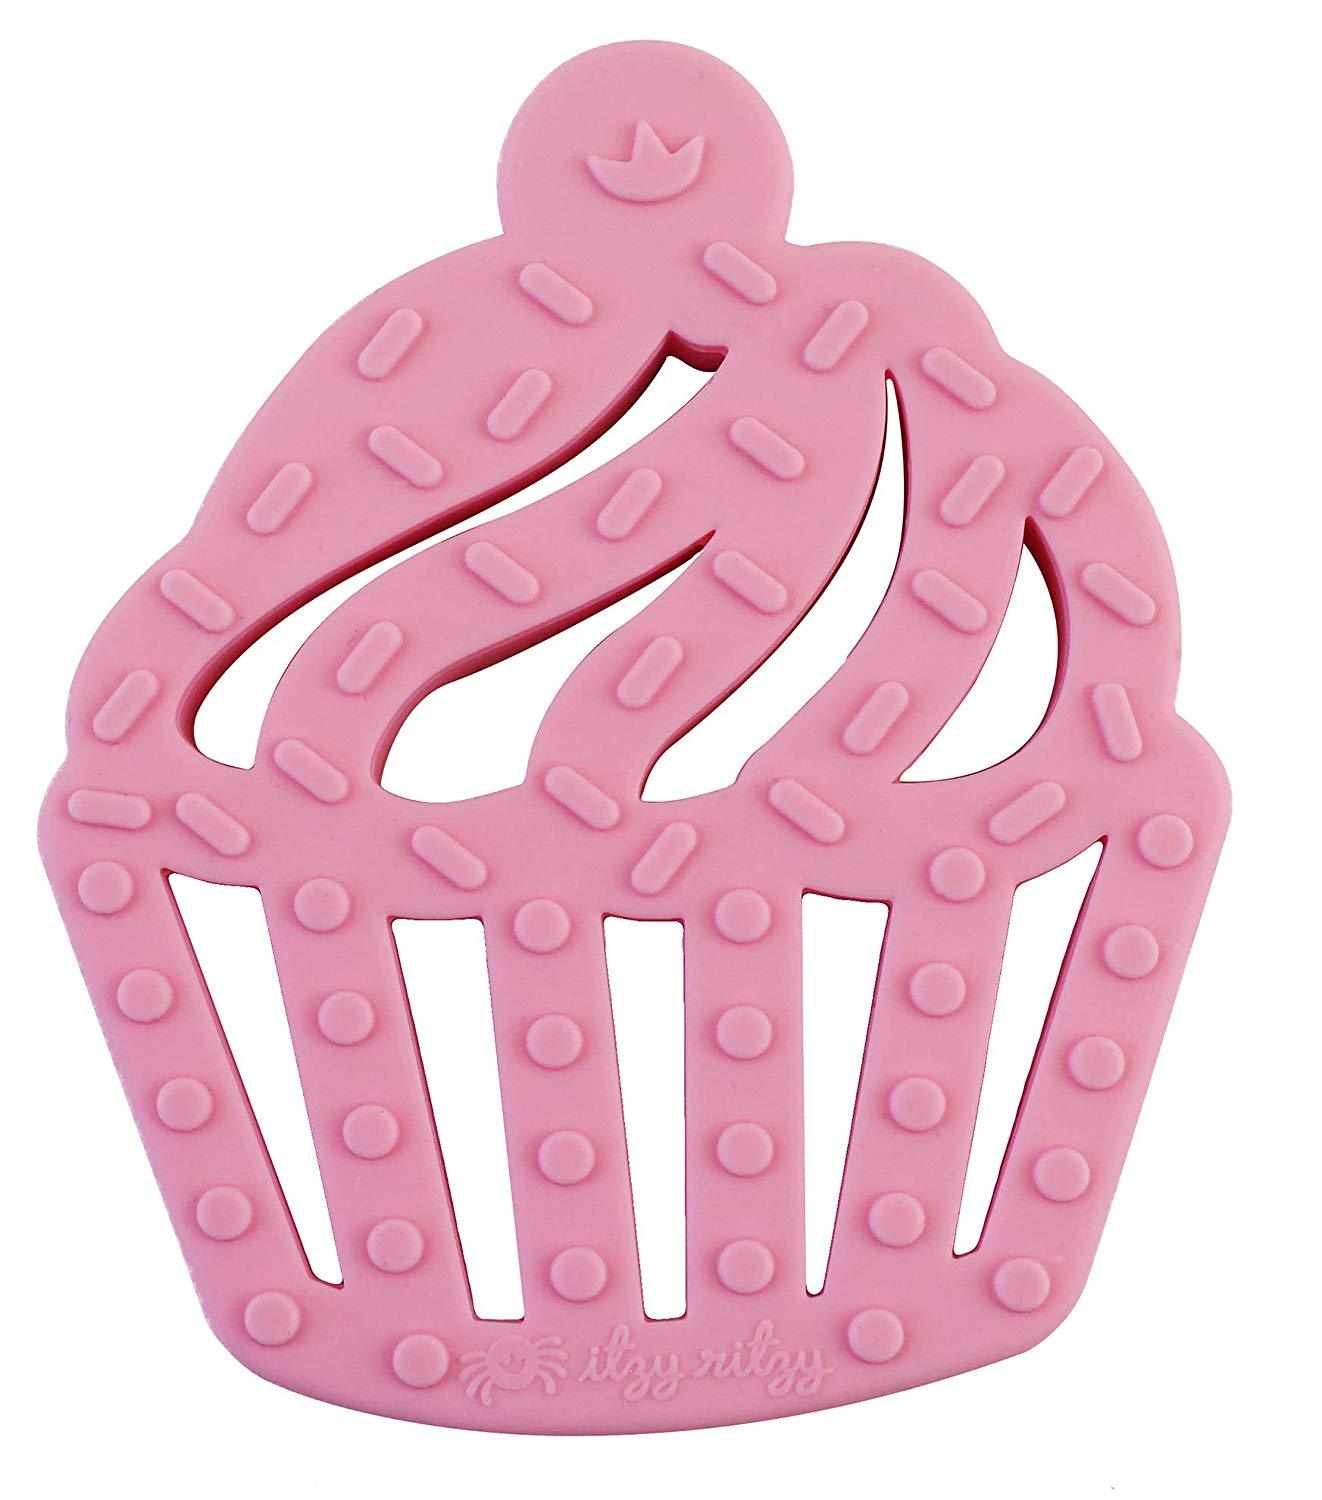 Itzy Ritzy Silicone Teether Cupcake